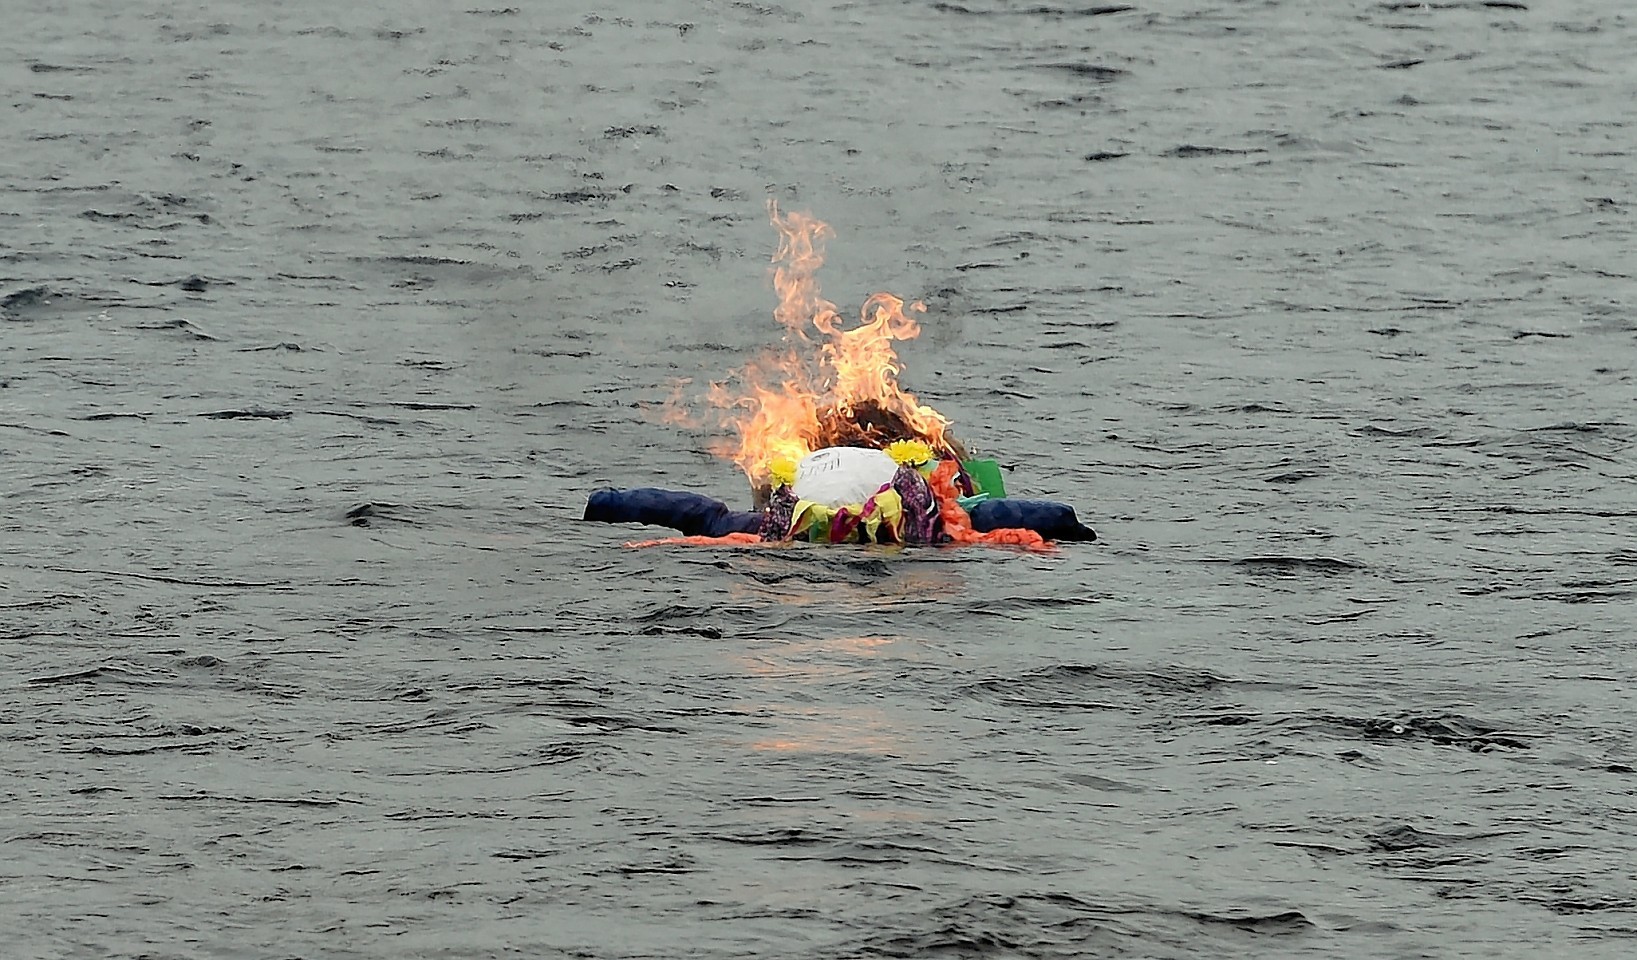 The burning doll floats down the river